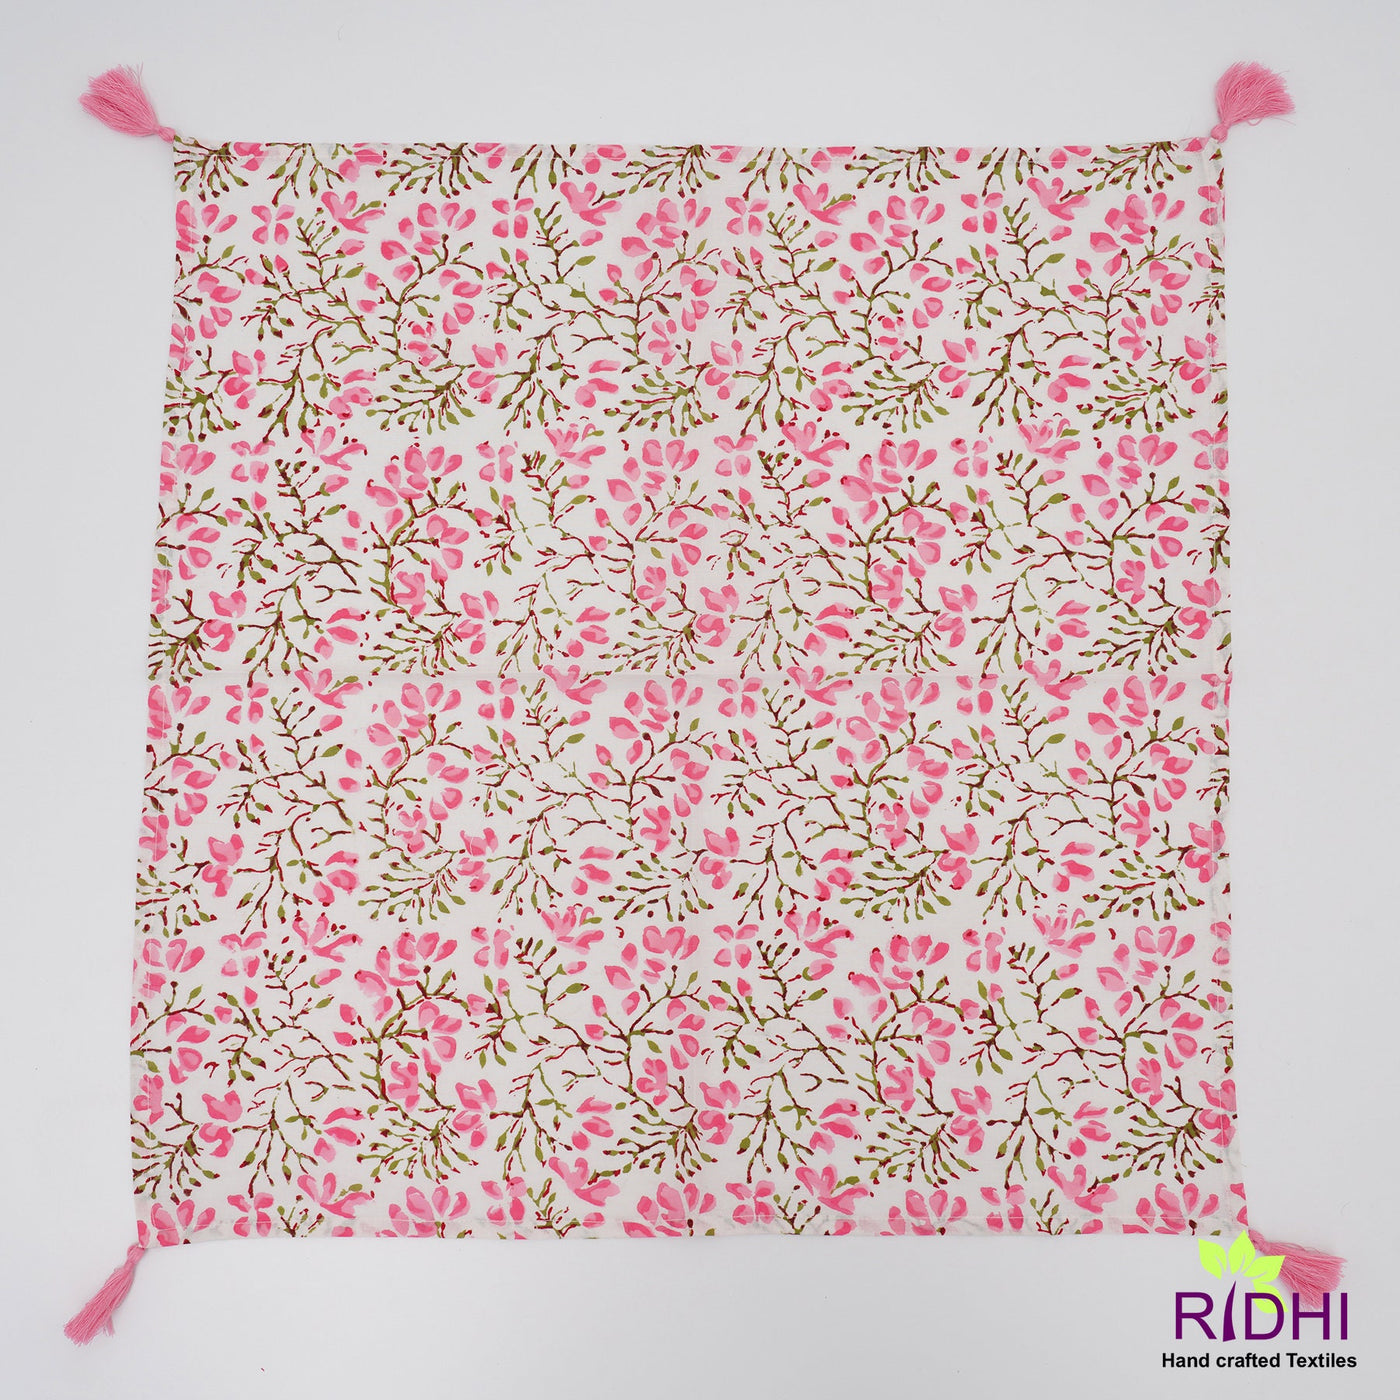 Taffy Pink, Pickle Green Indian Hand Block Floral Printed Cotton Cloth Napkins, Wedding Event Home Party Gift, 9x9"- Cocktail 20x20"- Dinner